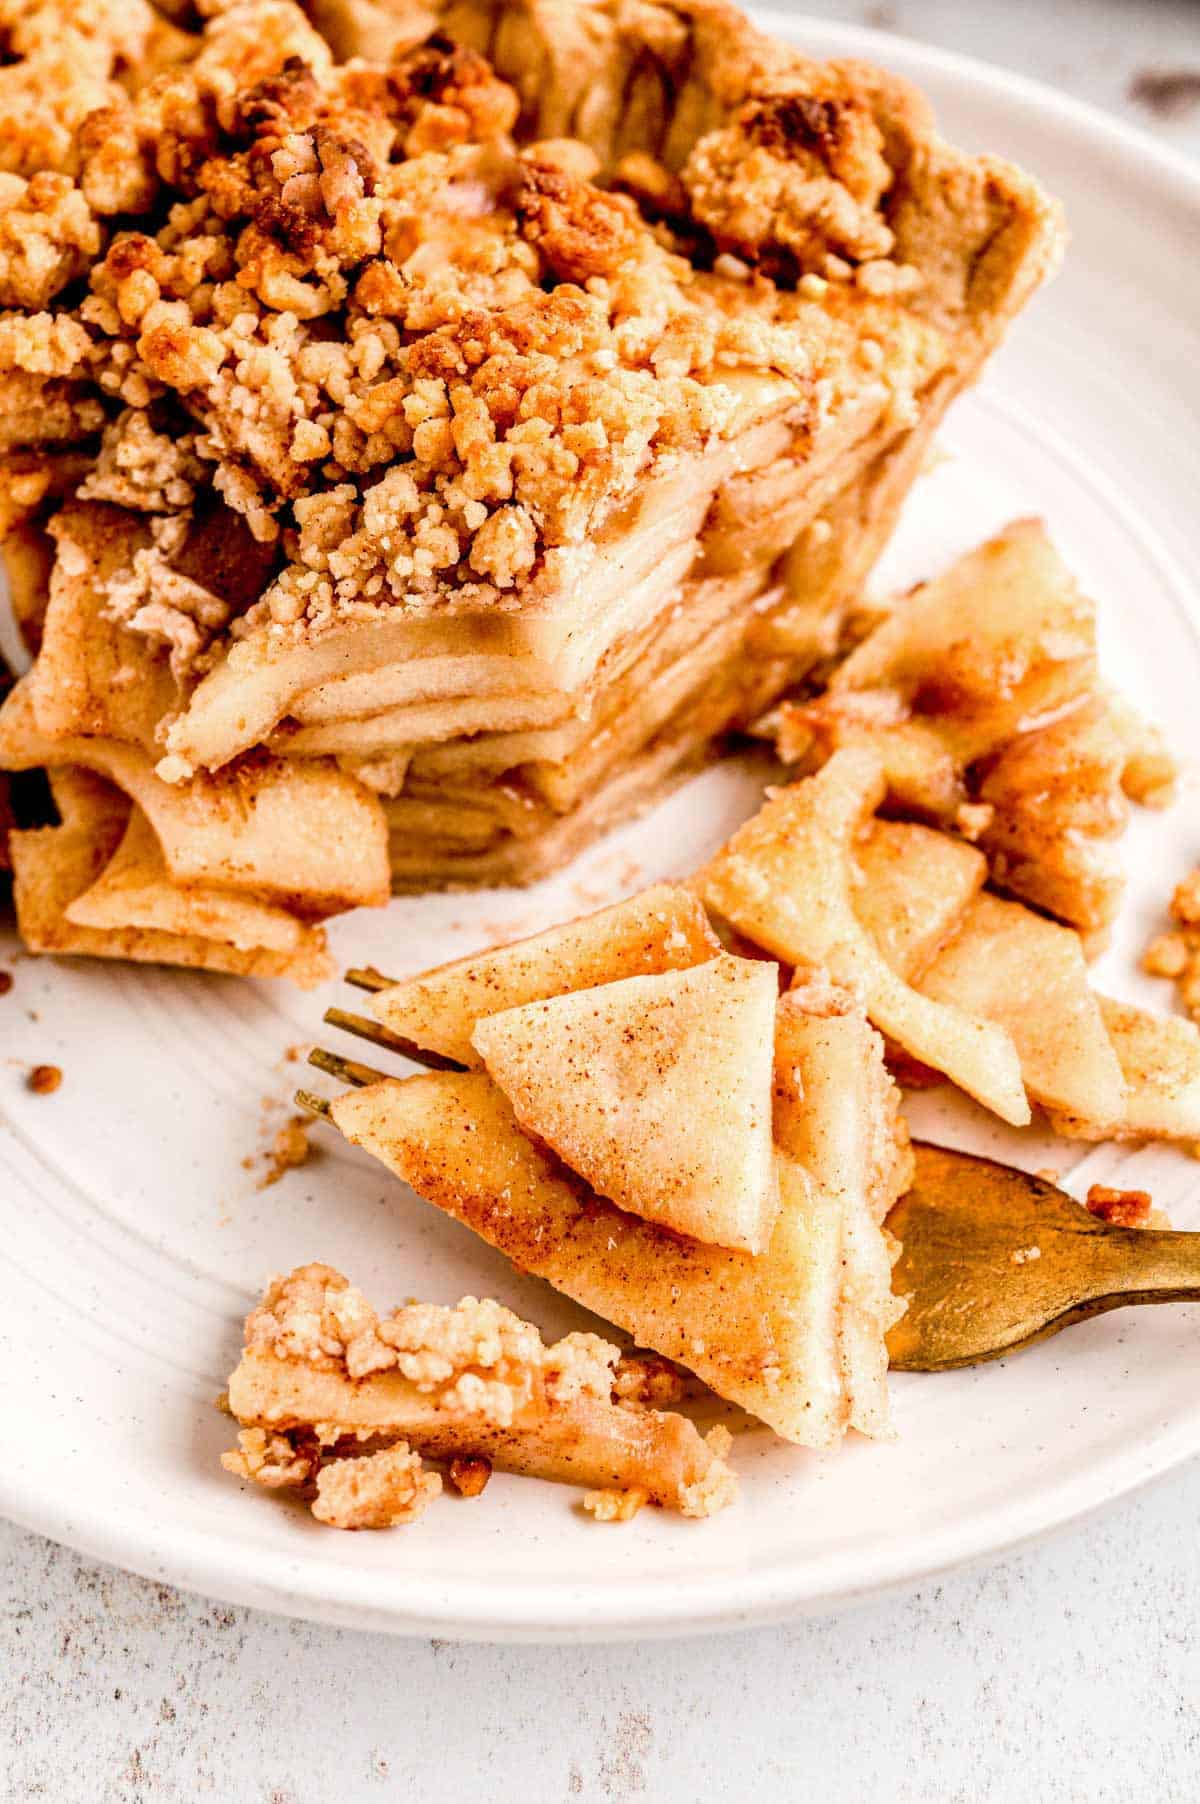 A fork picking up some healthier apple pie on a plate.